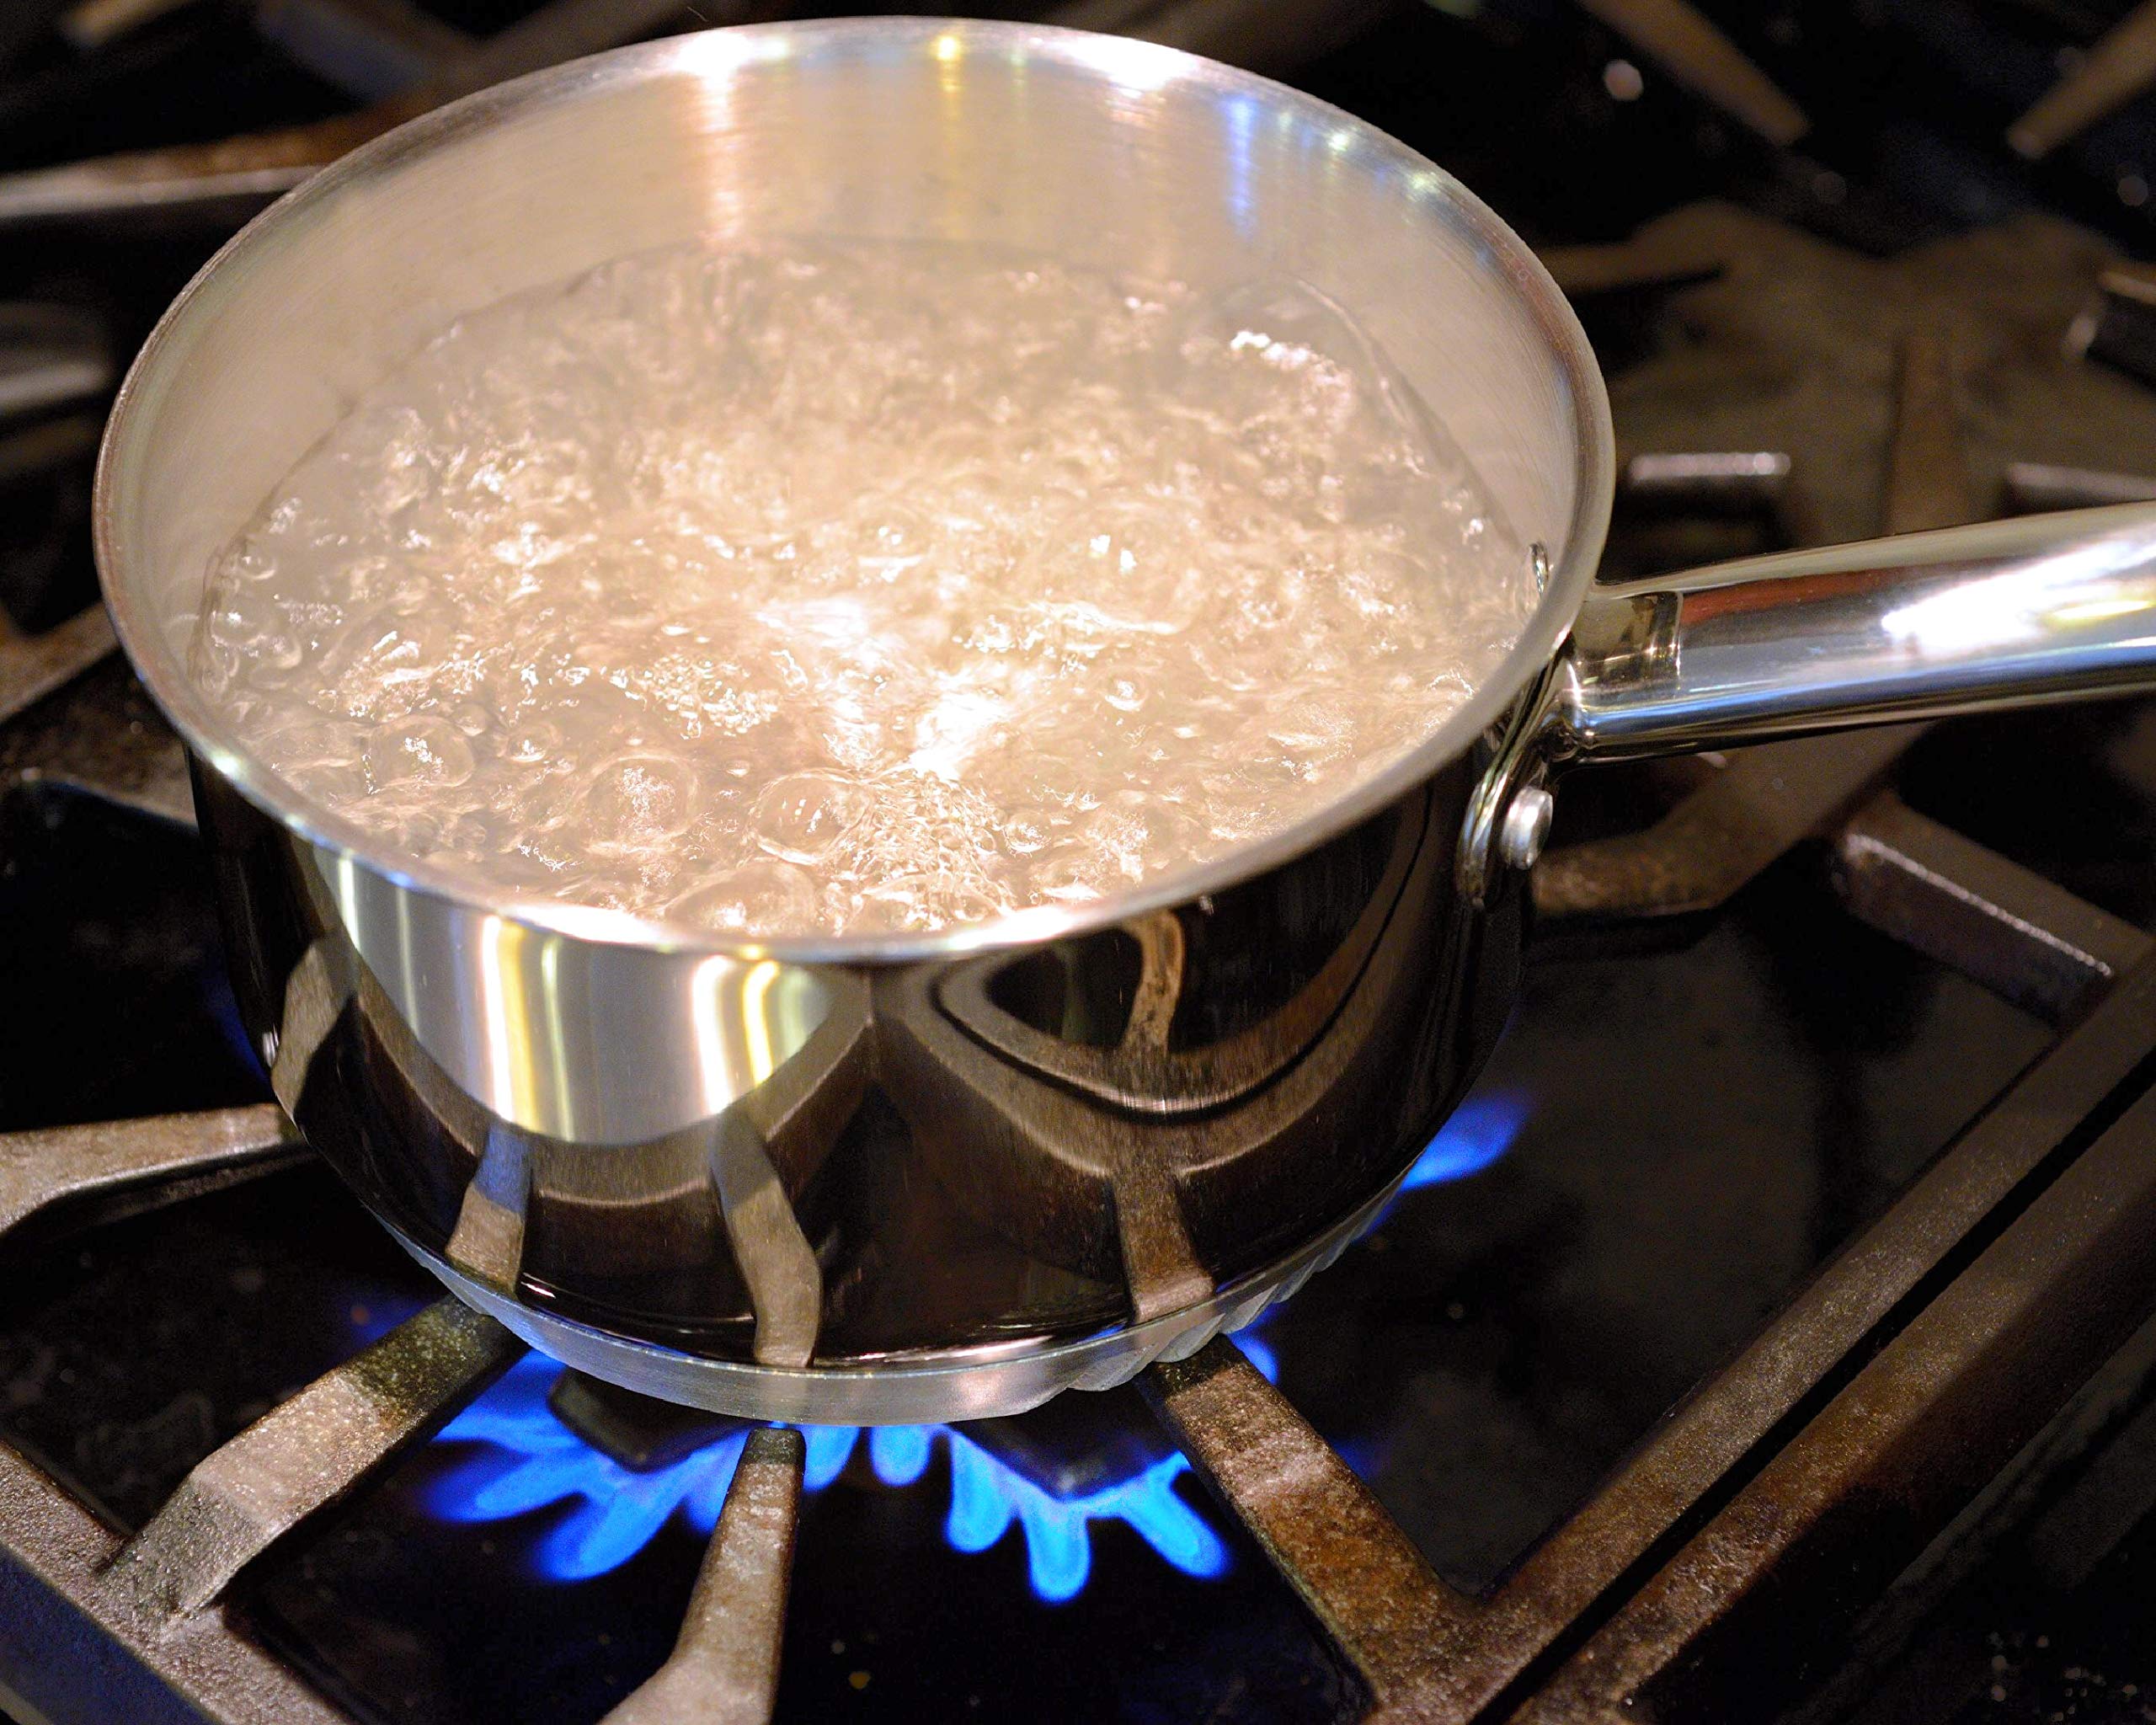 Turbo Pot® FreshAir™ Rapid Boil Stainless Steel 2 qt. Sauce Pan, time-and-energy saving cookware for gas stove Metallic